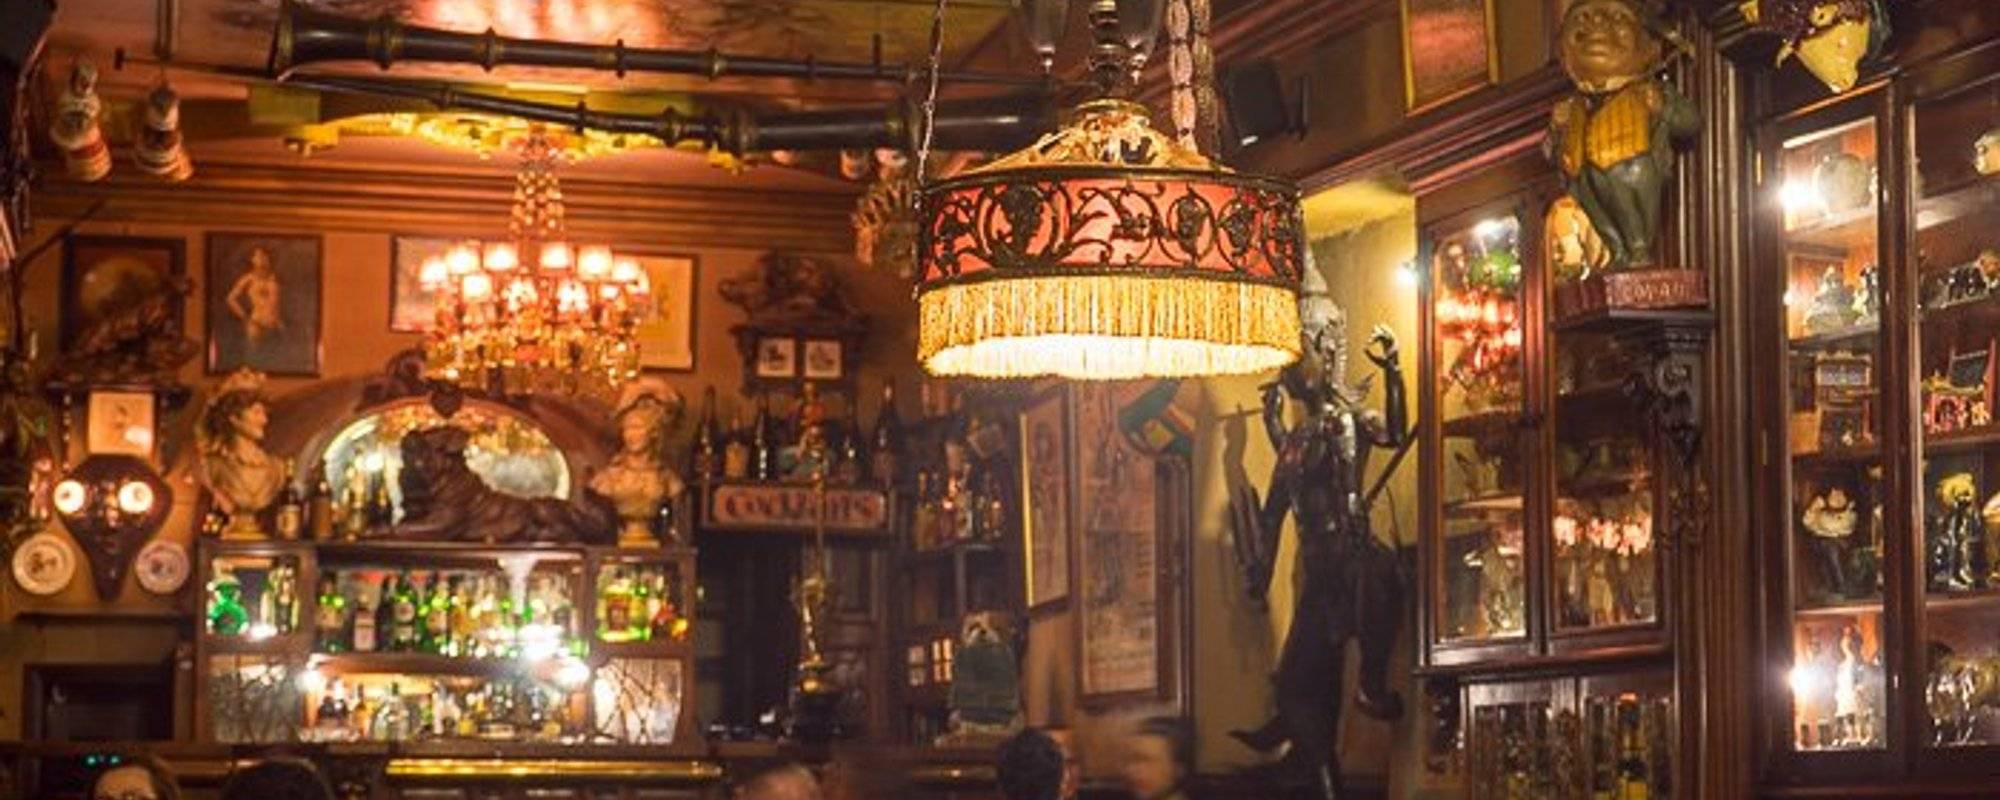 The Craziest Bar In Lisbon - The Chinese Pavilion